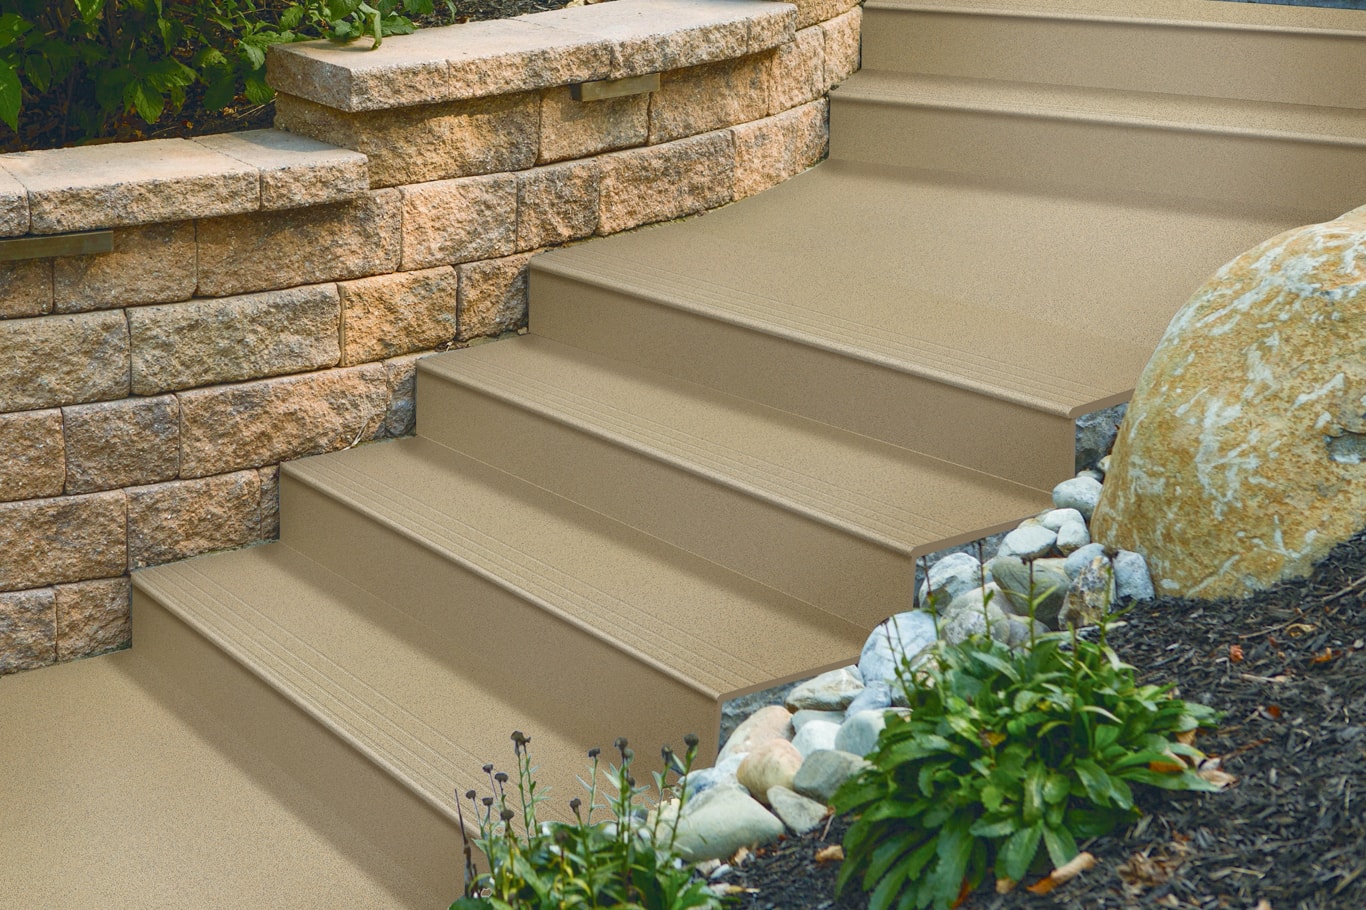 How to install outdoor tiles on stairs?